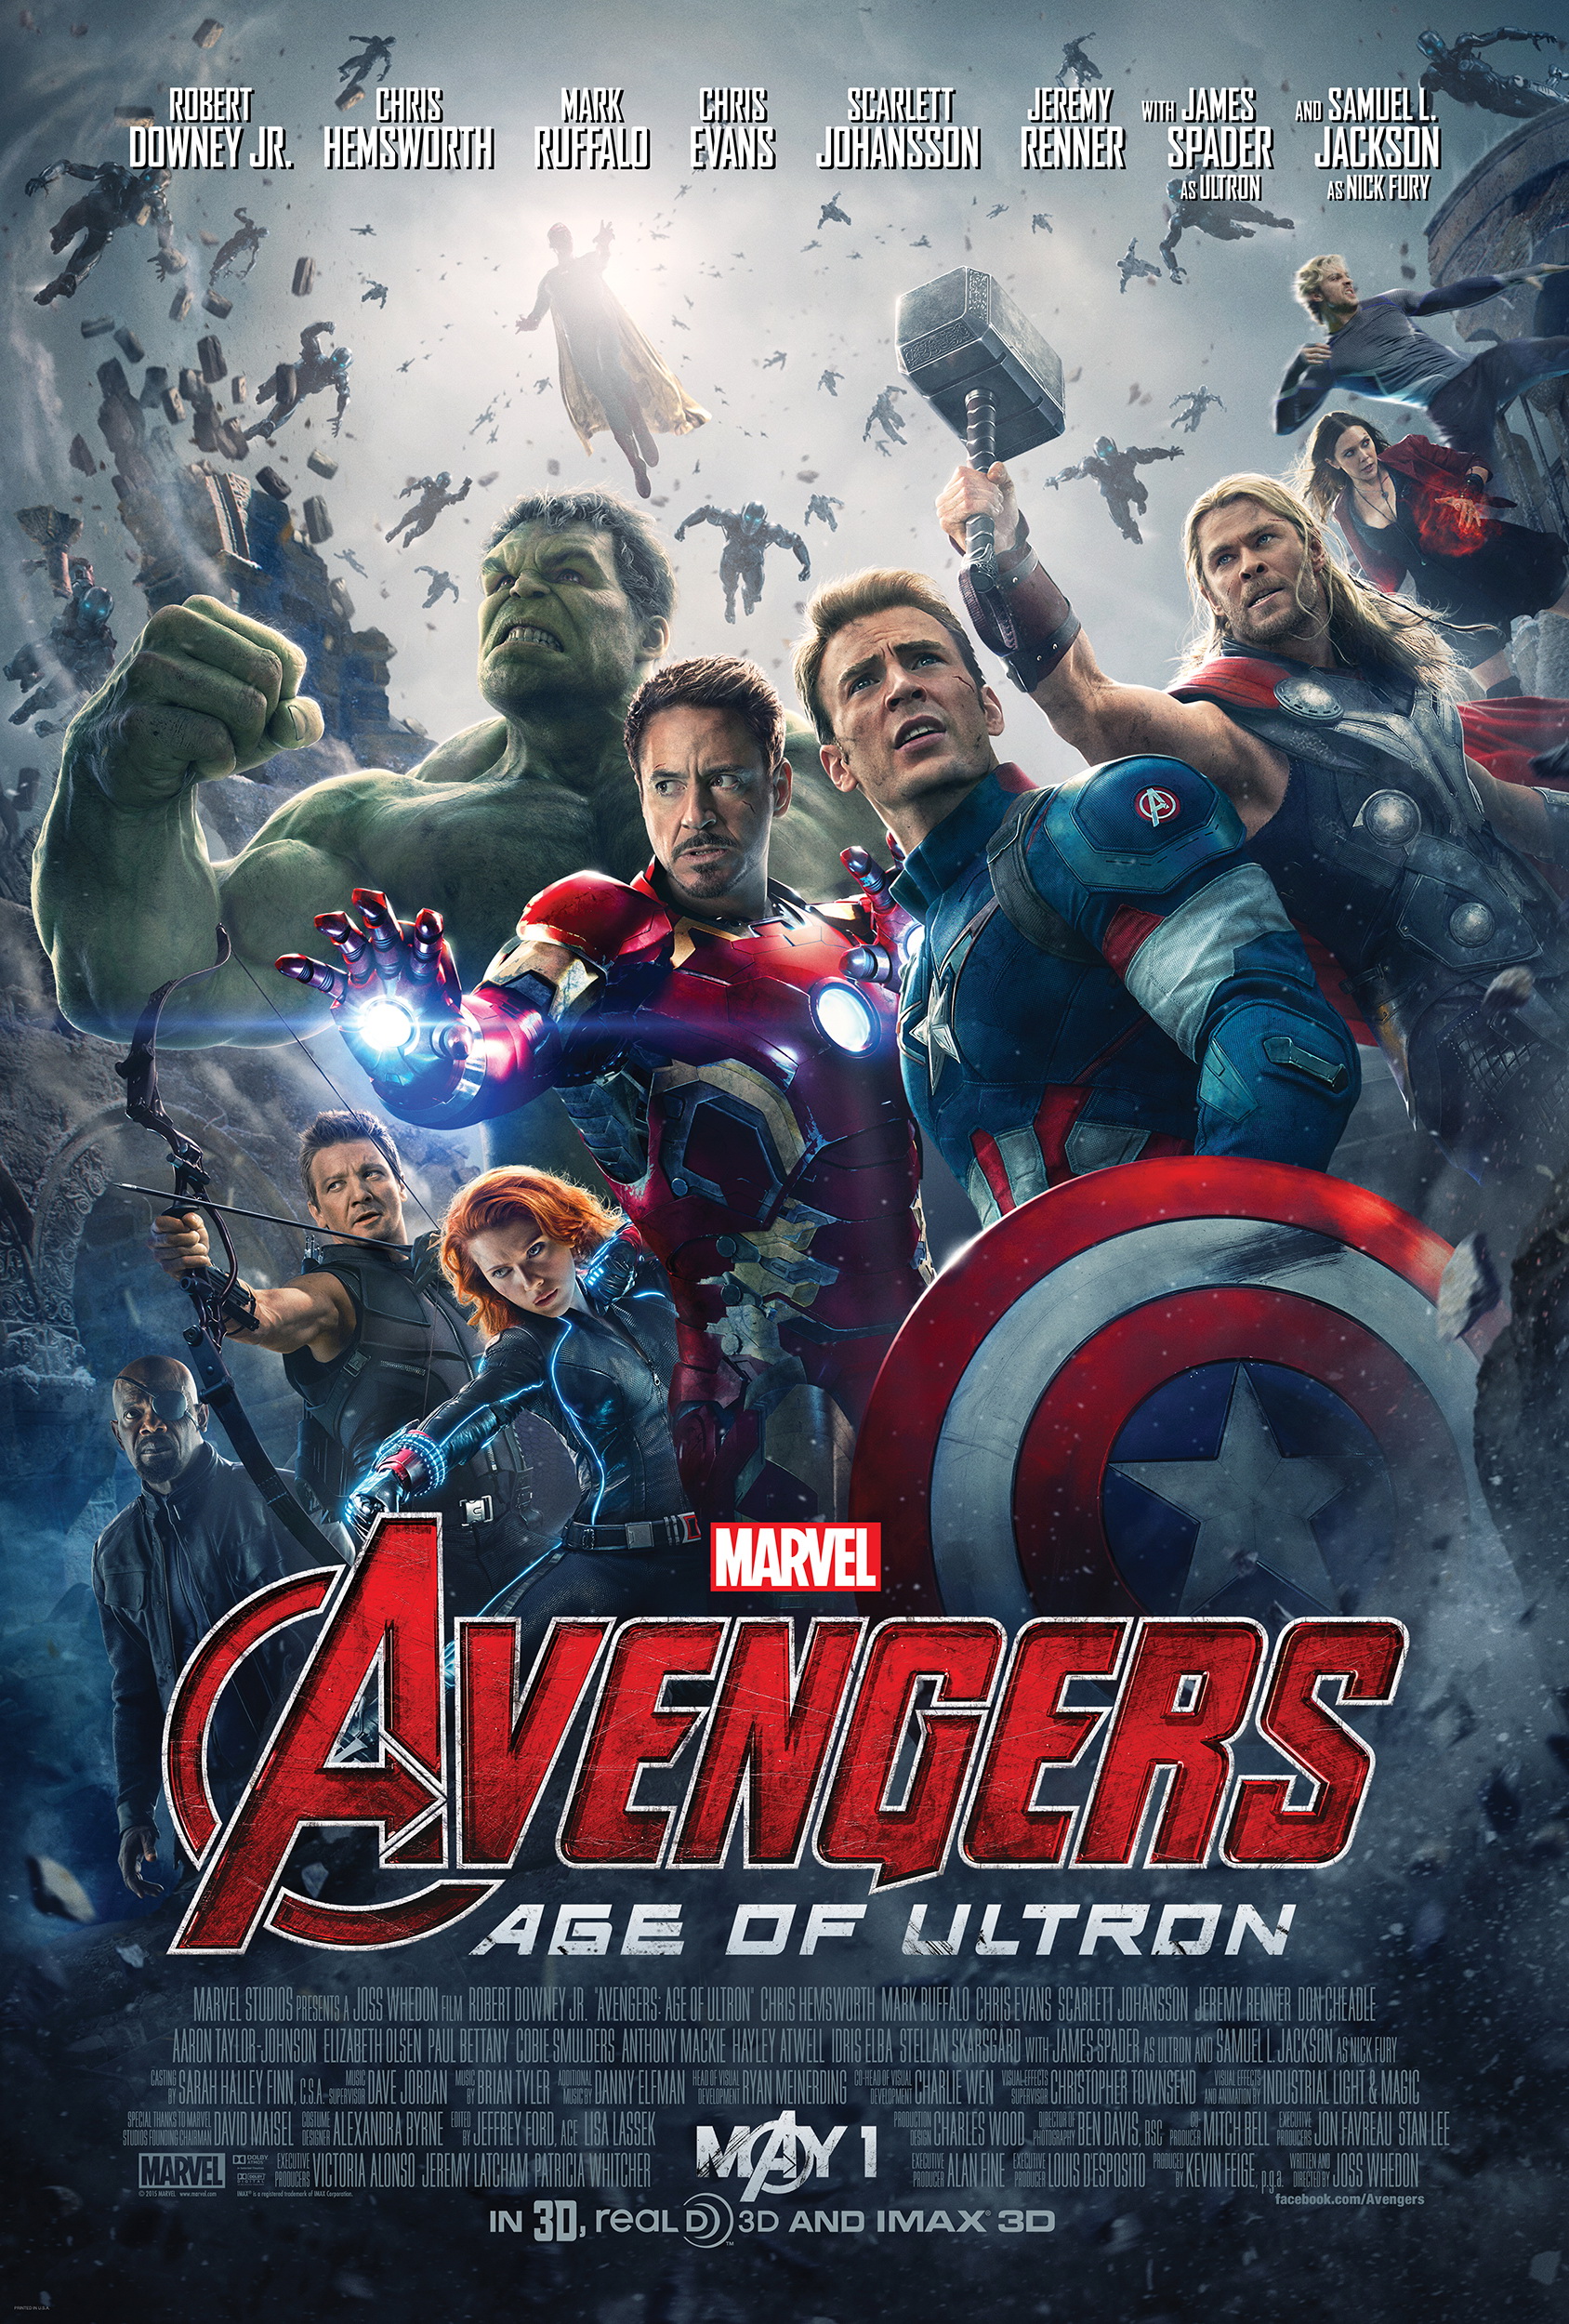 http://vignette2.wikia.nocookie.net/marvelcinematicuniverse/images/c/c7/Avengers_Age_Of_Ultron-poster1.jpg/revision/latest?cb=20150224202250